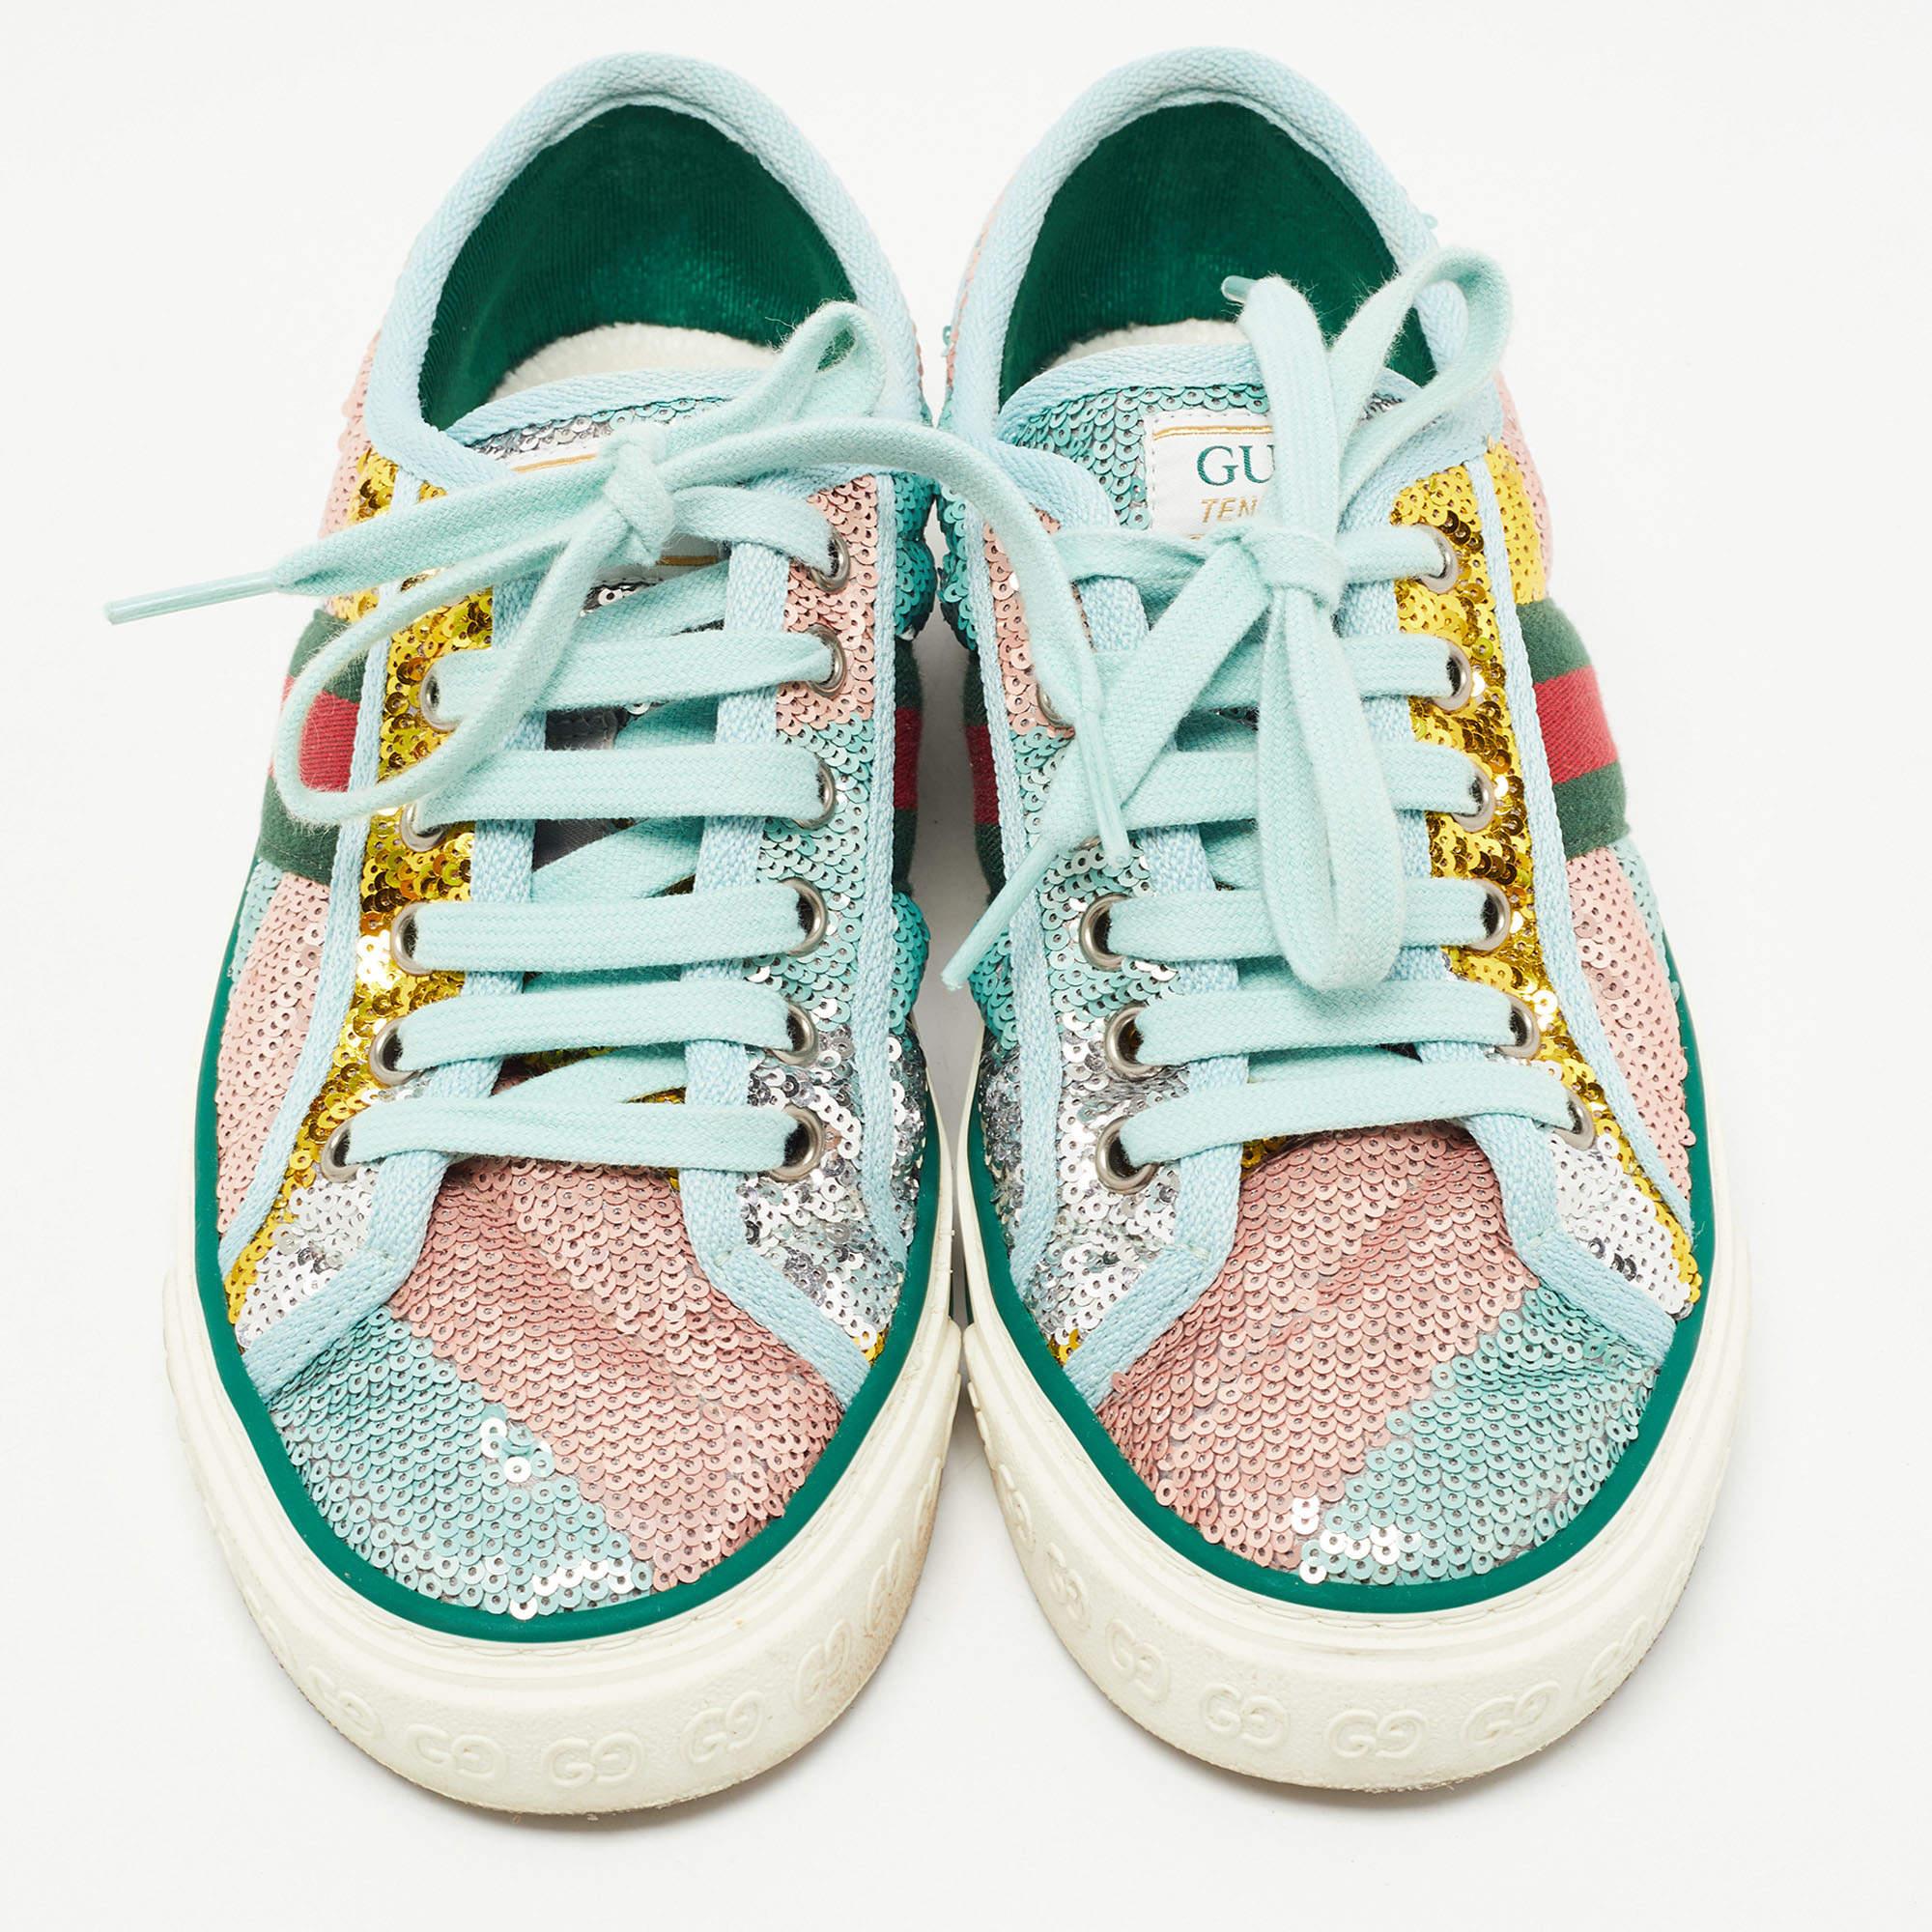 Gucci Multicolor Canvas and Sequin Tennis 1977 Sneakers Size 35.5 2